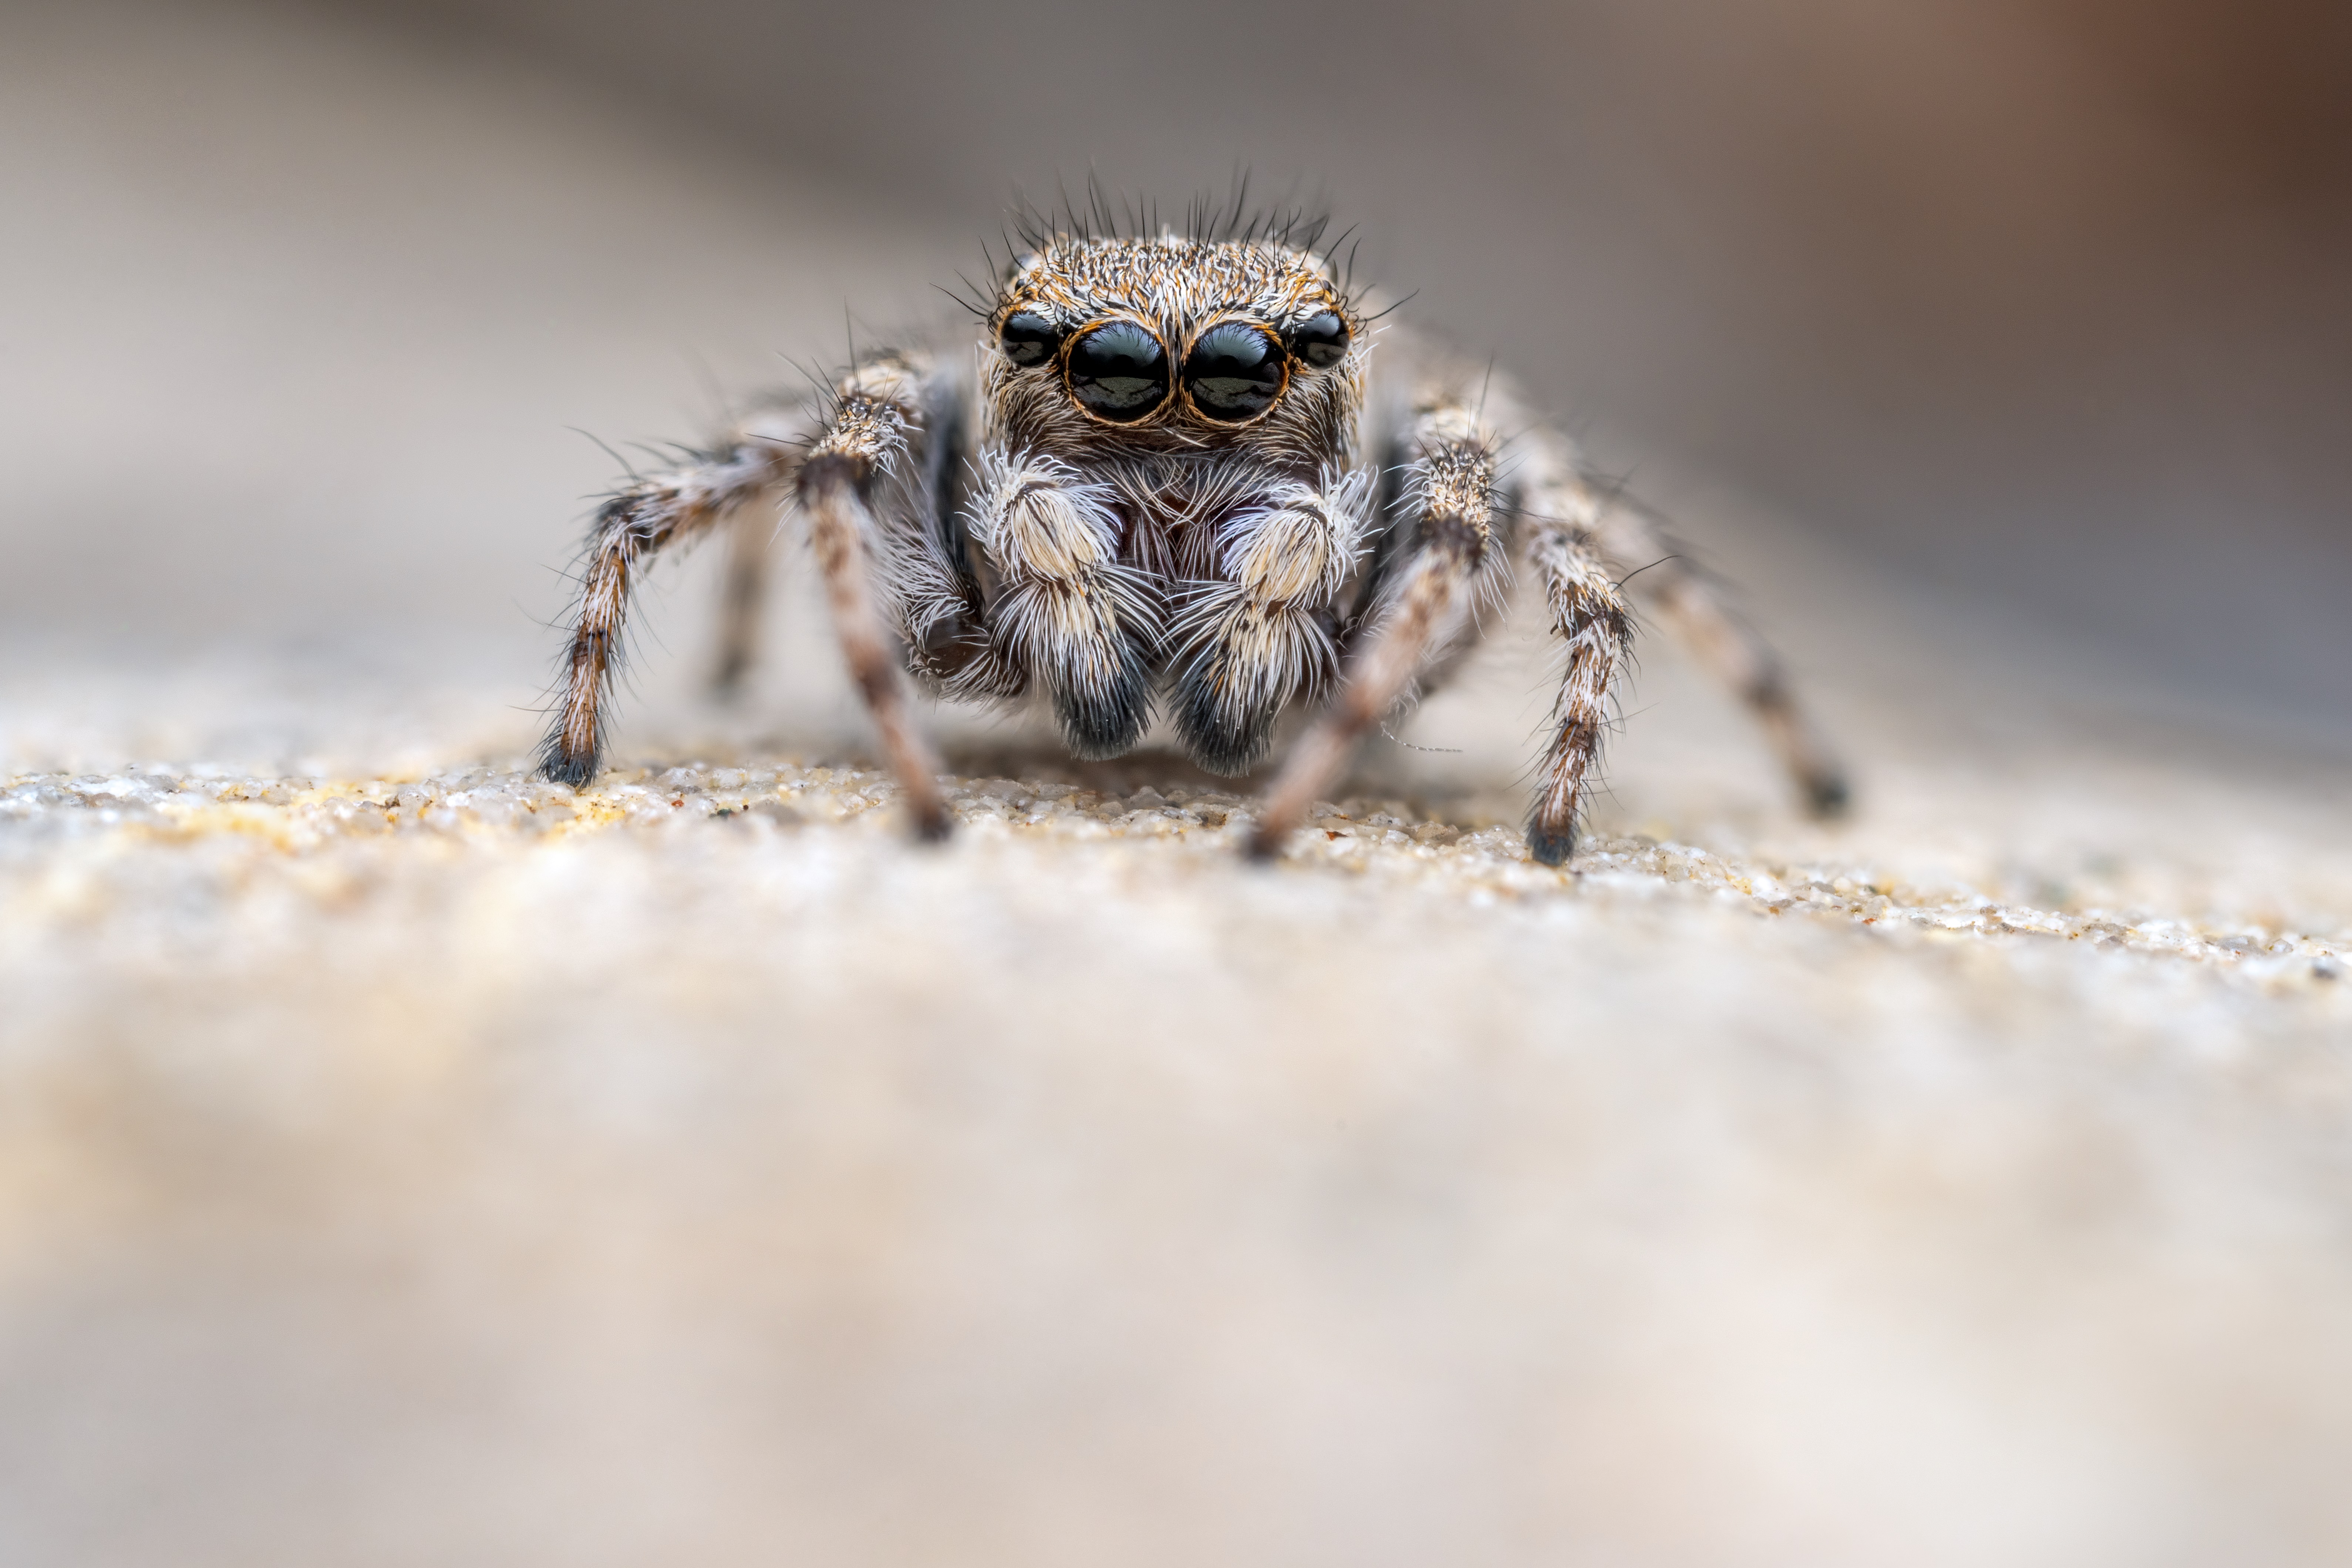 The Critically Endangered Distinguished jumping spider lives at the site (Roman Willi)